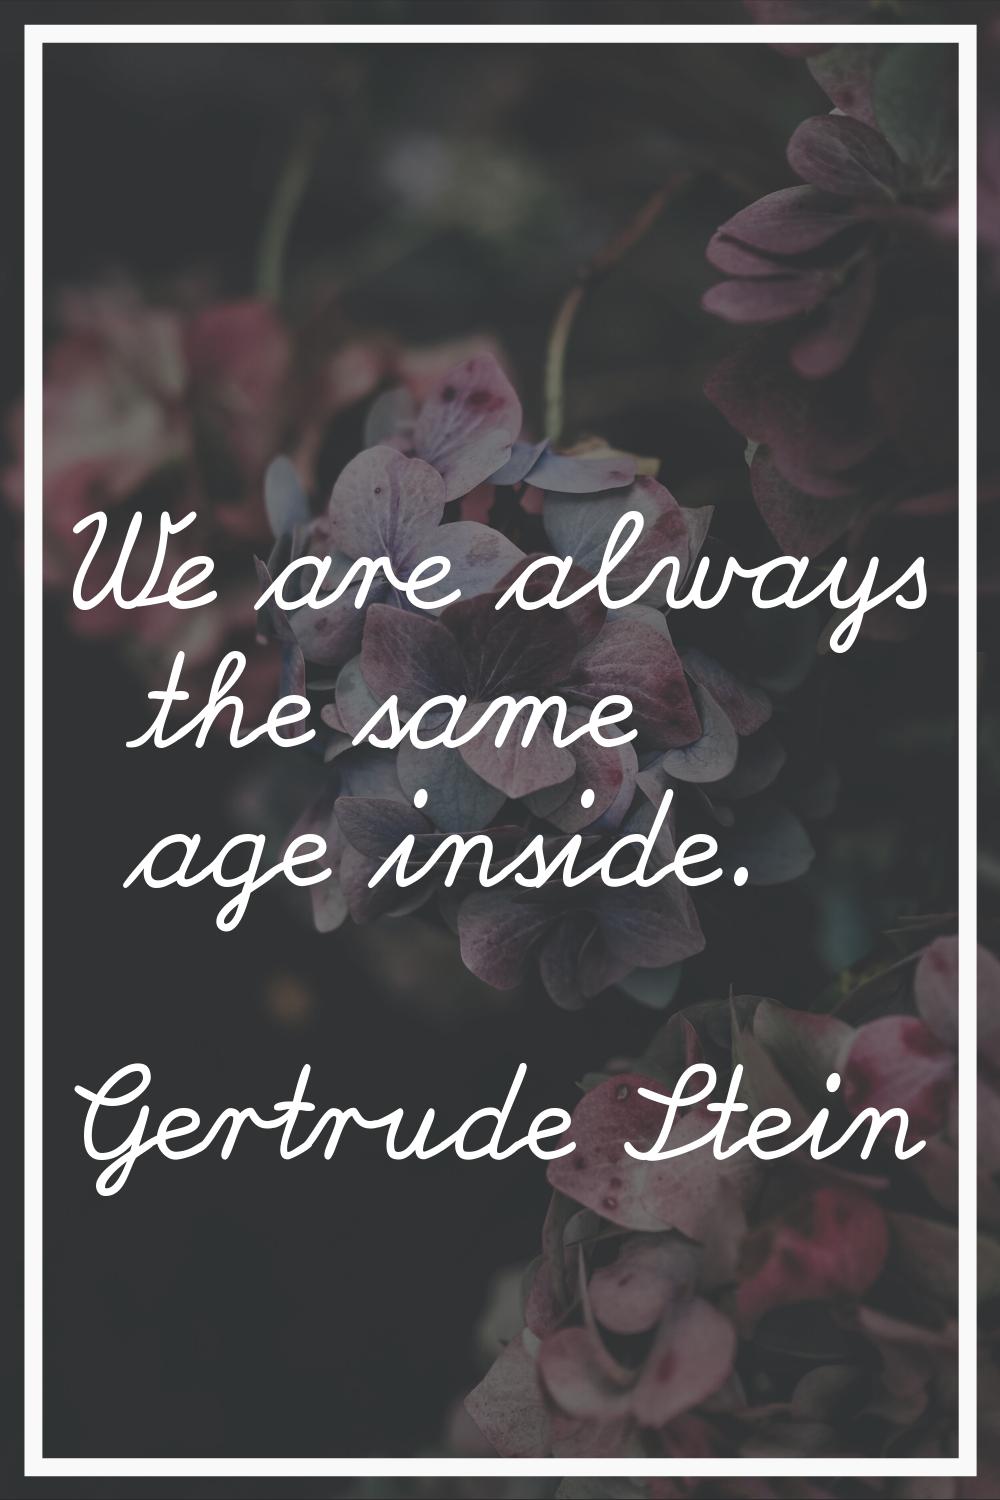 We are always the same age inside.